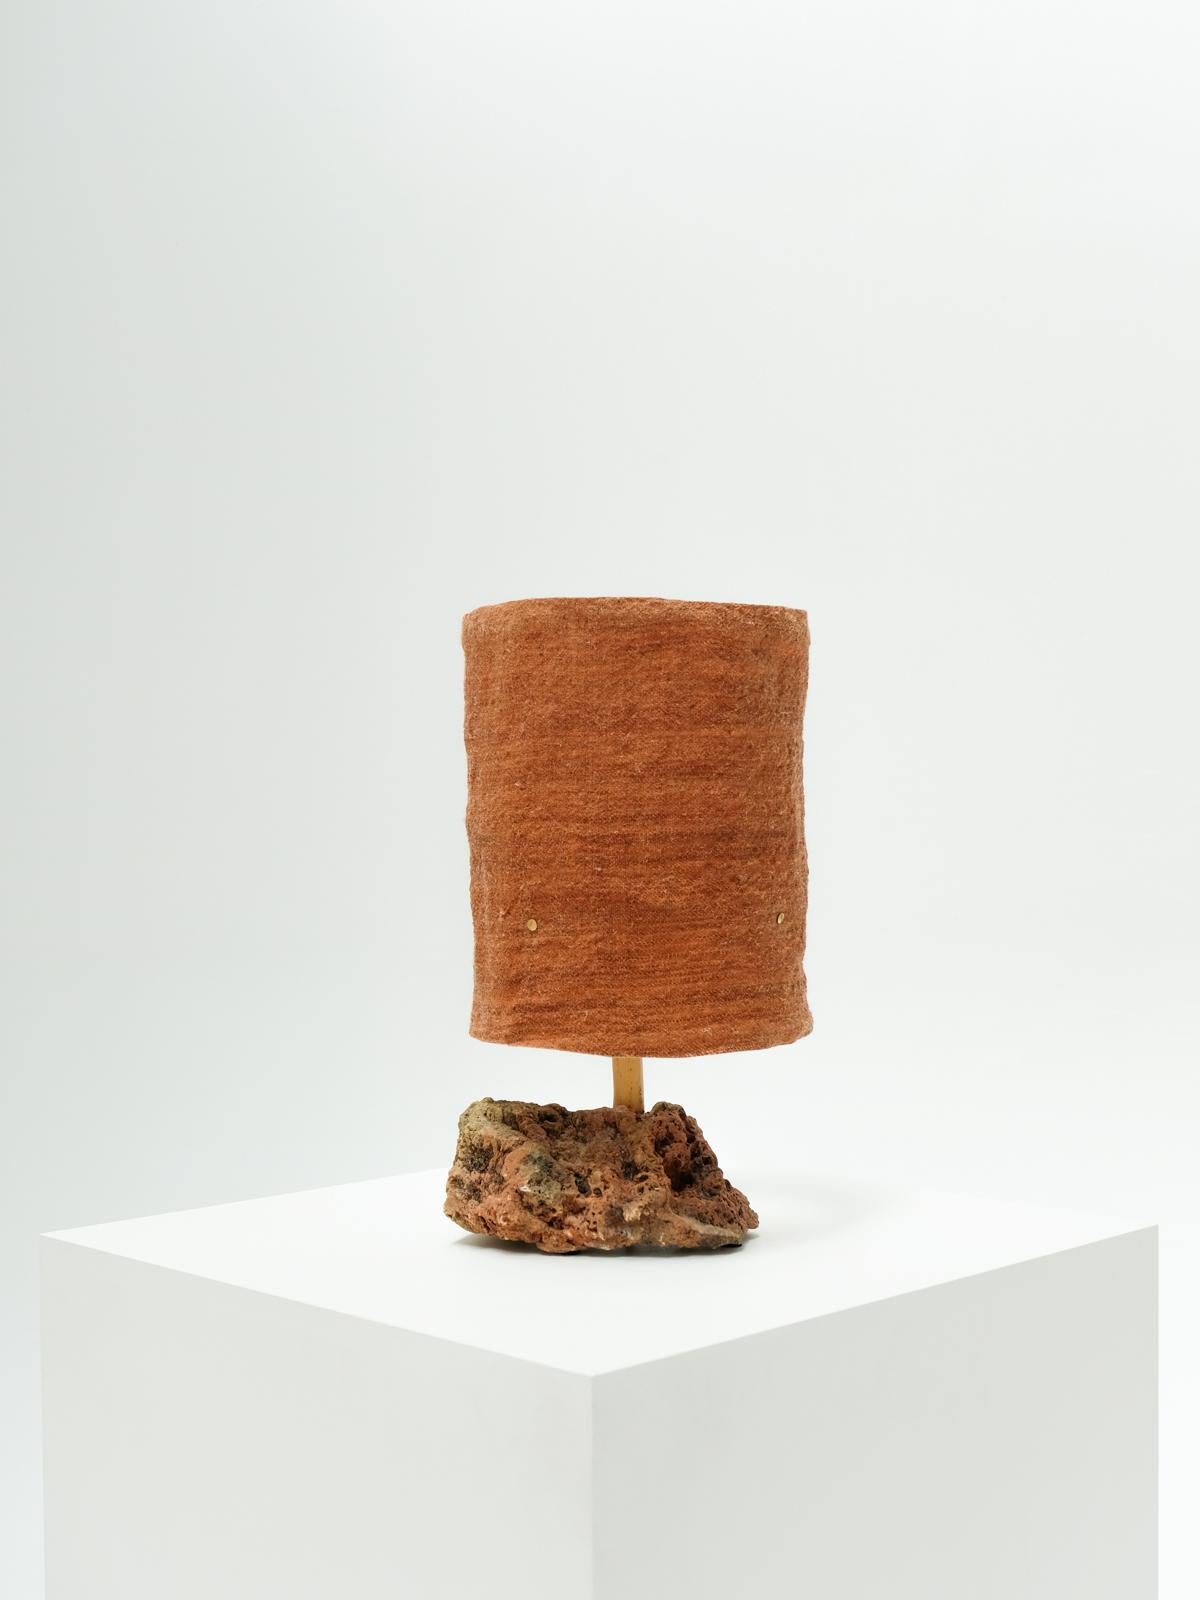 Stone Hjra Table Lamp, Handspun and Handwoven wool lampshade, Made of Rock and Reed For Sale